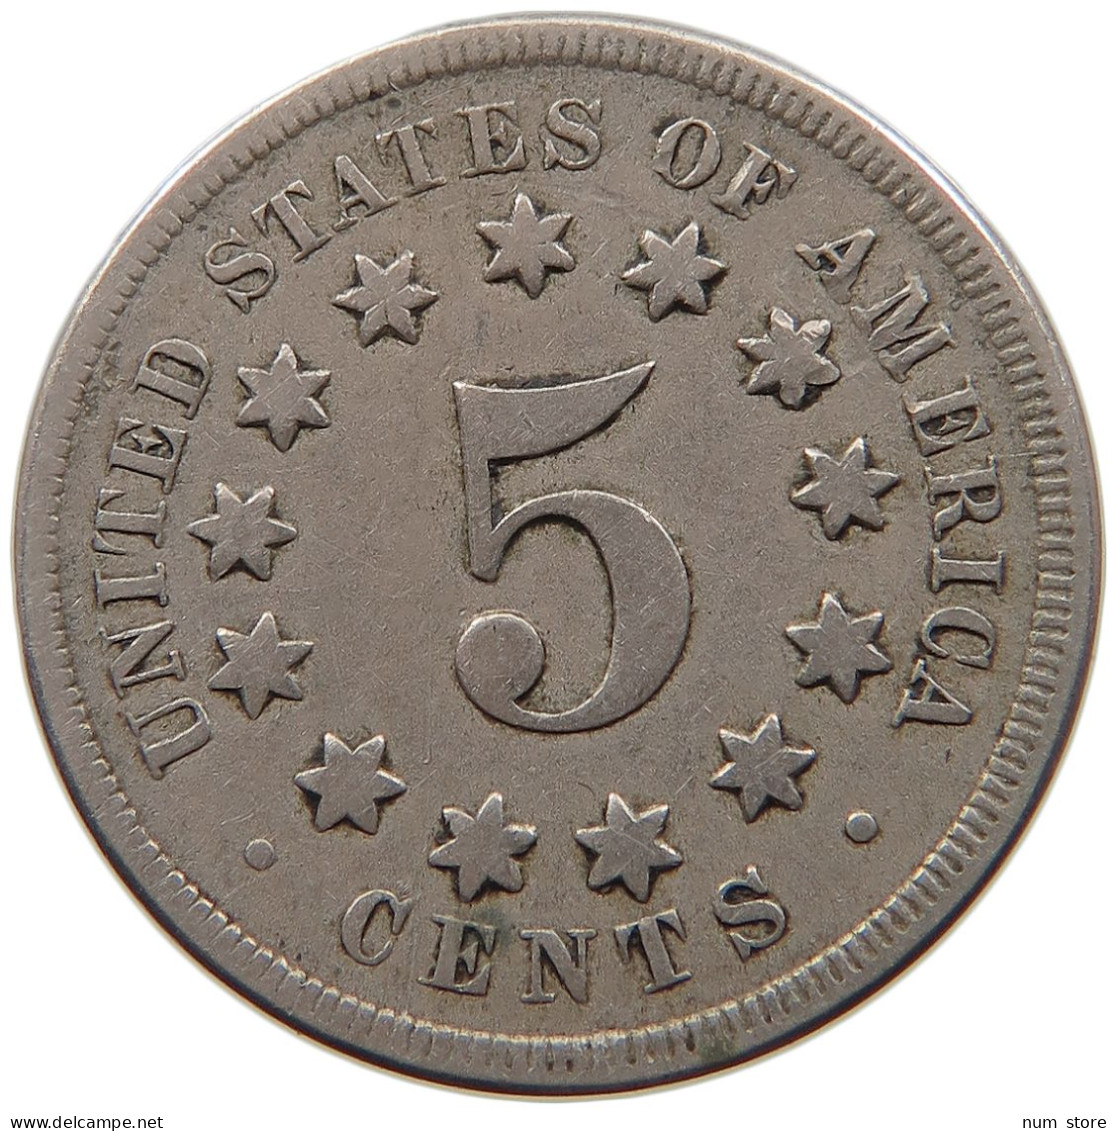 UNITED STATES OF AMERICA NICKEL 1868 SHIELD #t143 0353 - 1866-83: Shield (Écusson)